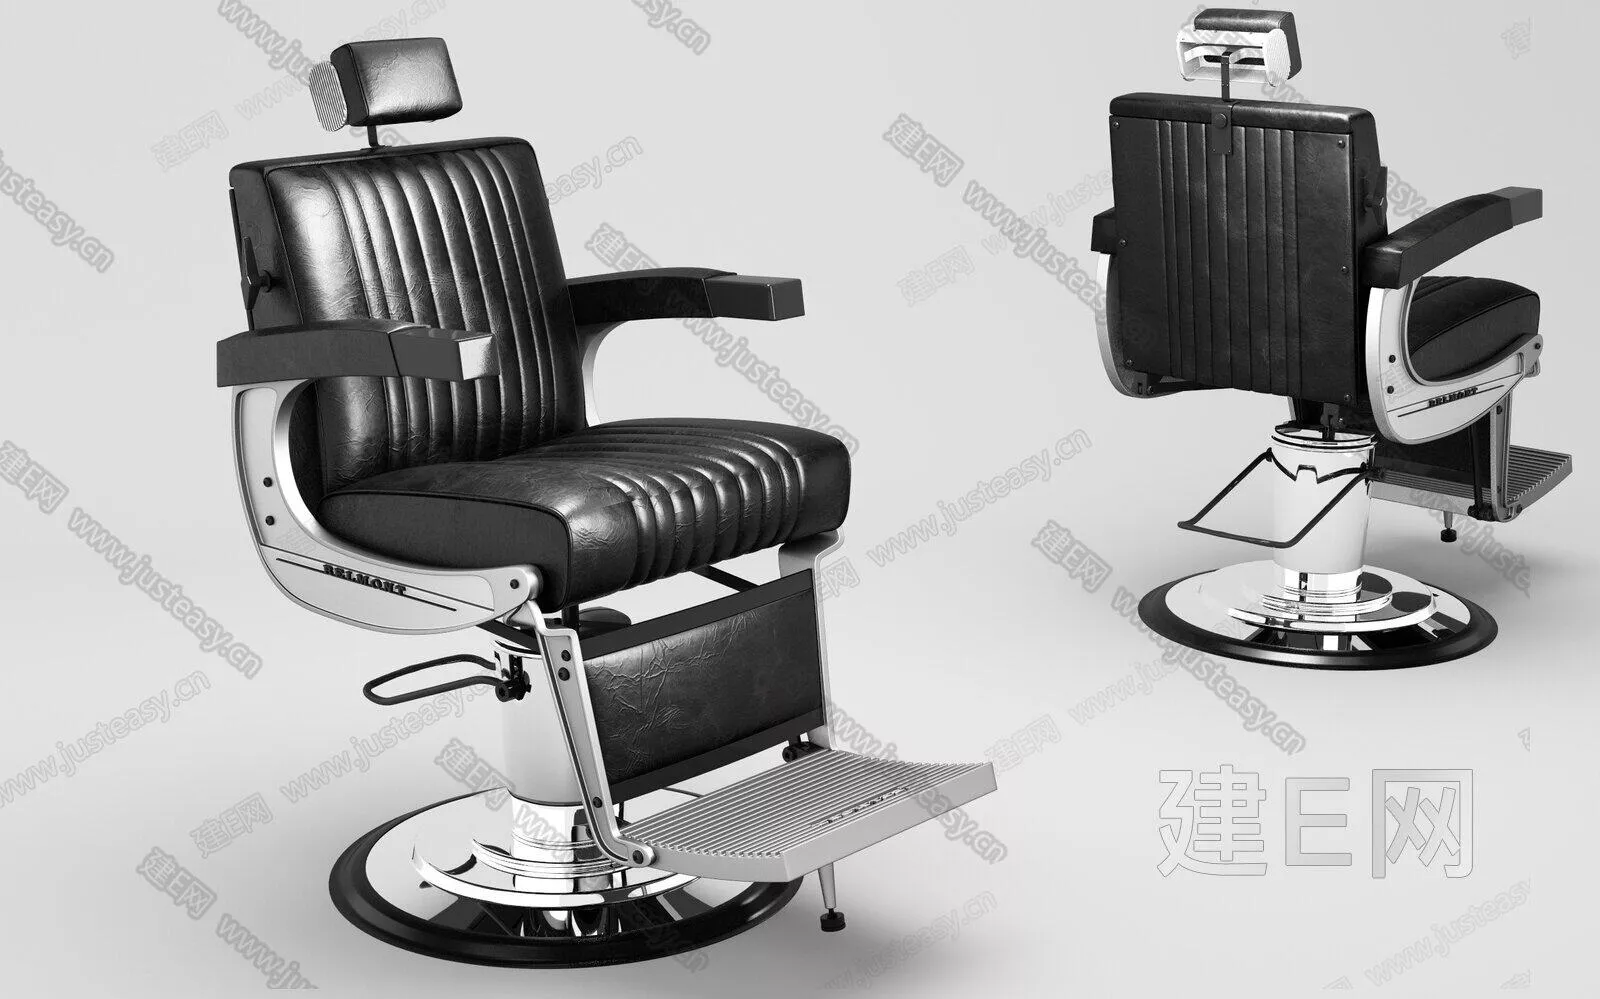 EUROPE OFFICE CHAIR - SKETCHUP 3D MODEL - ENSCAPE - 112086526